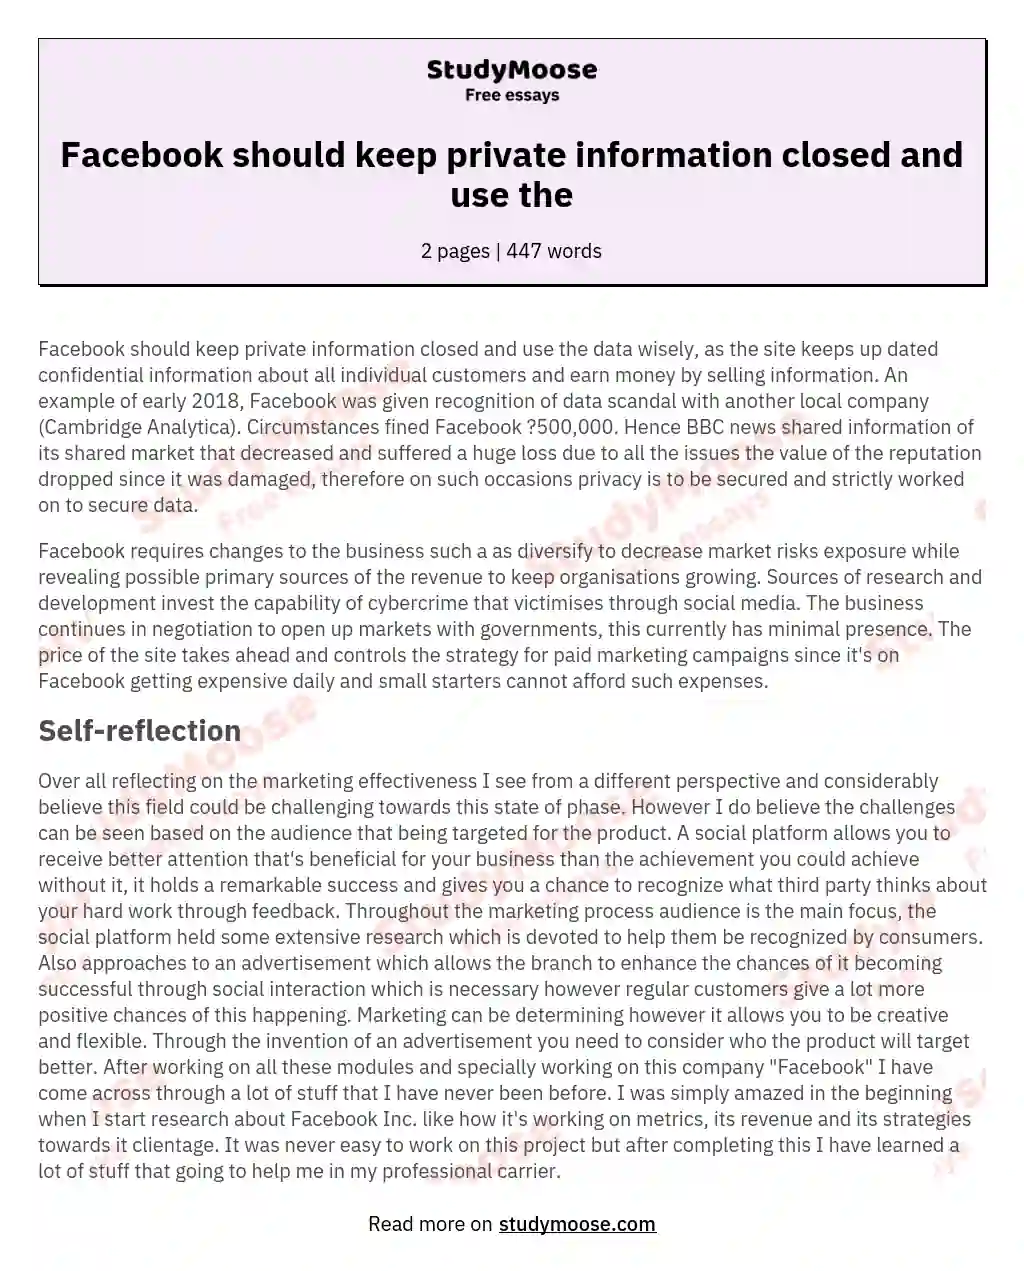 Facebook should keep private information closed and use the essay